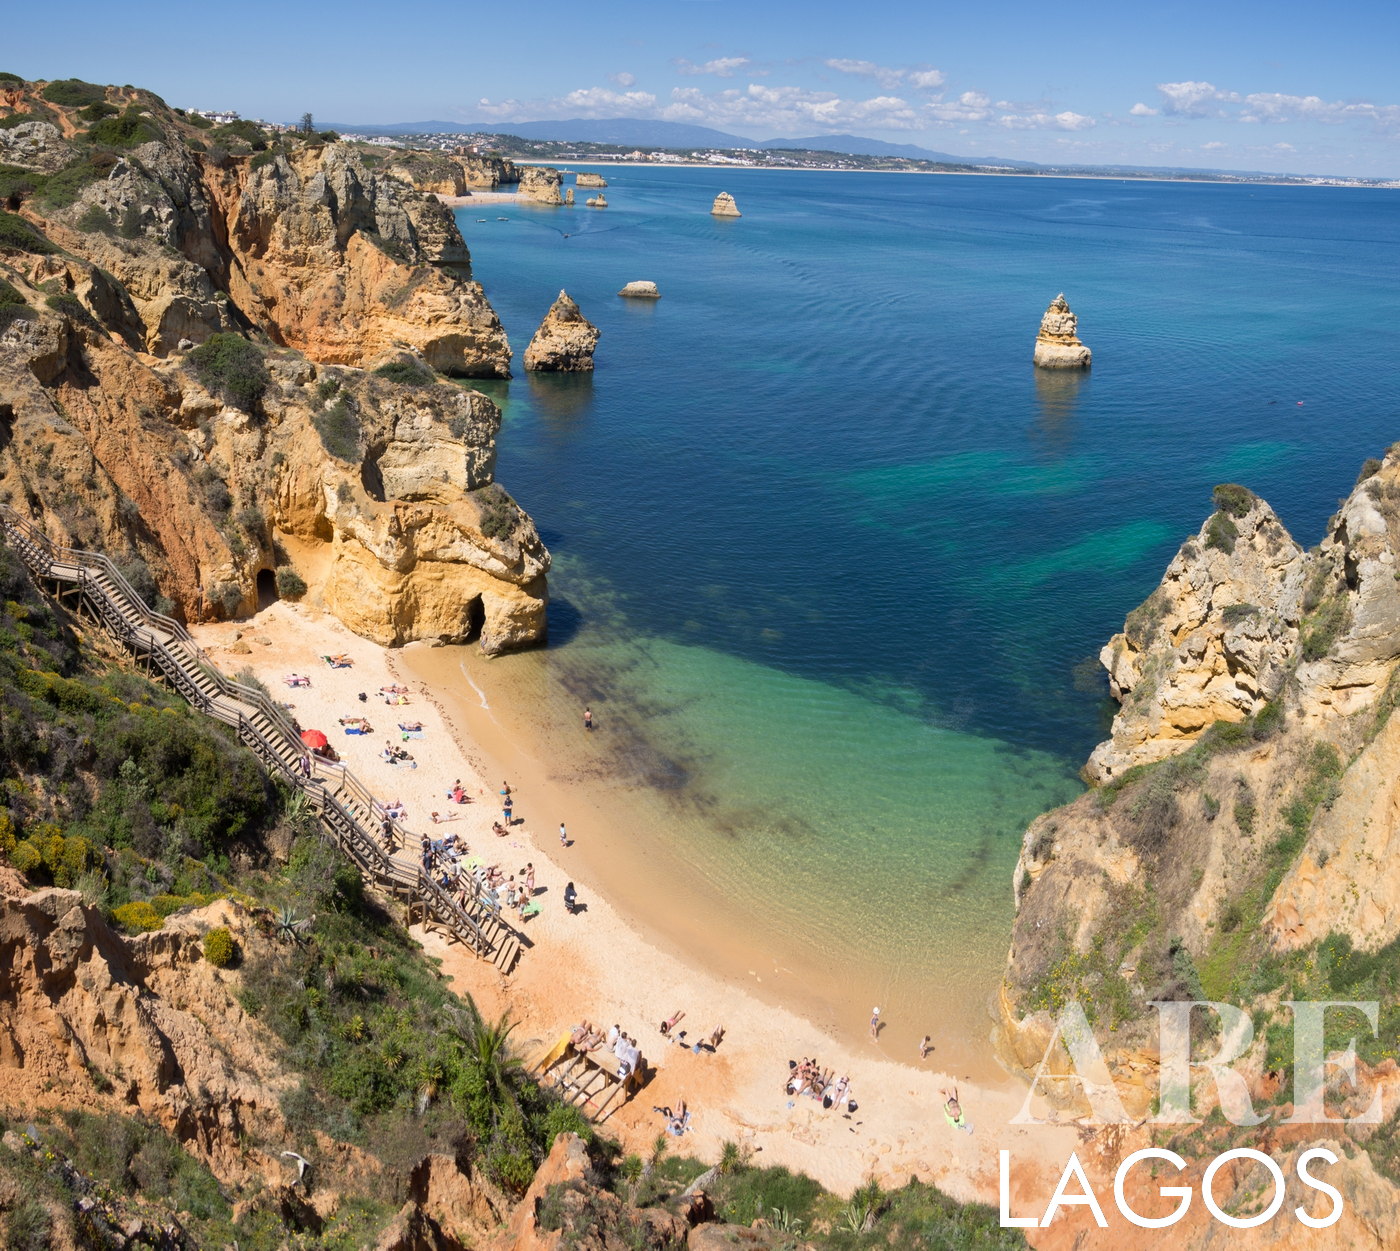 Overlooking Camilo Beach from the Cliffs of Lagos, Algarve